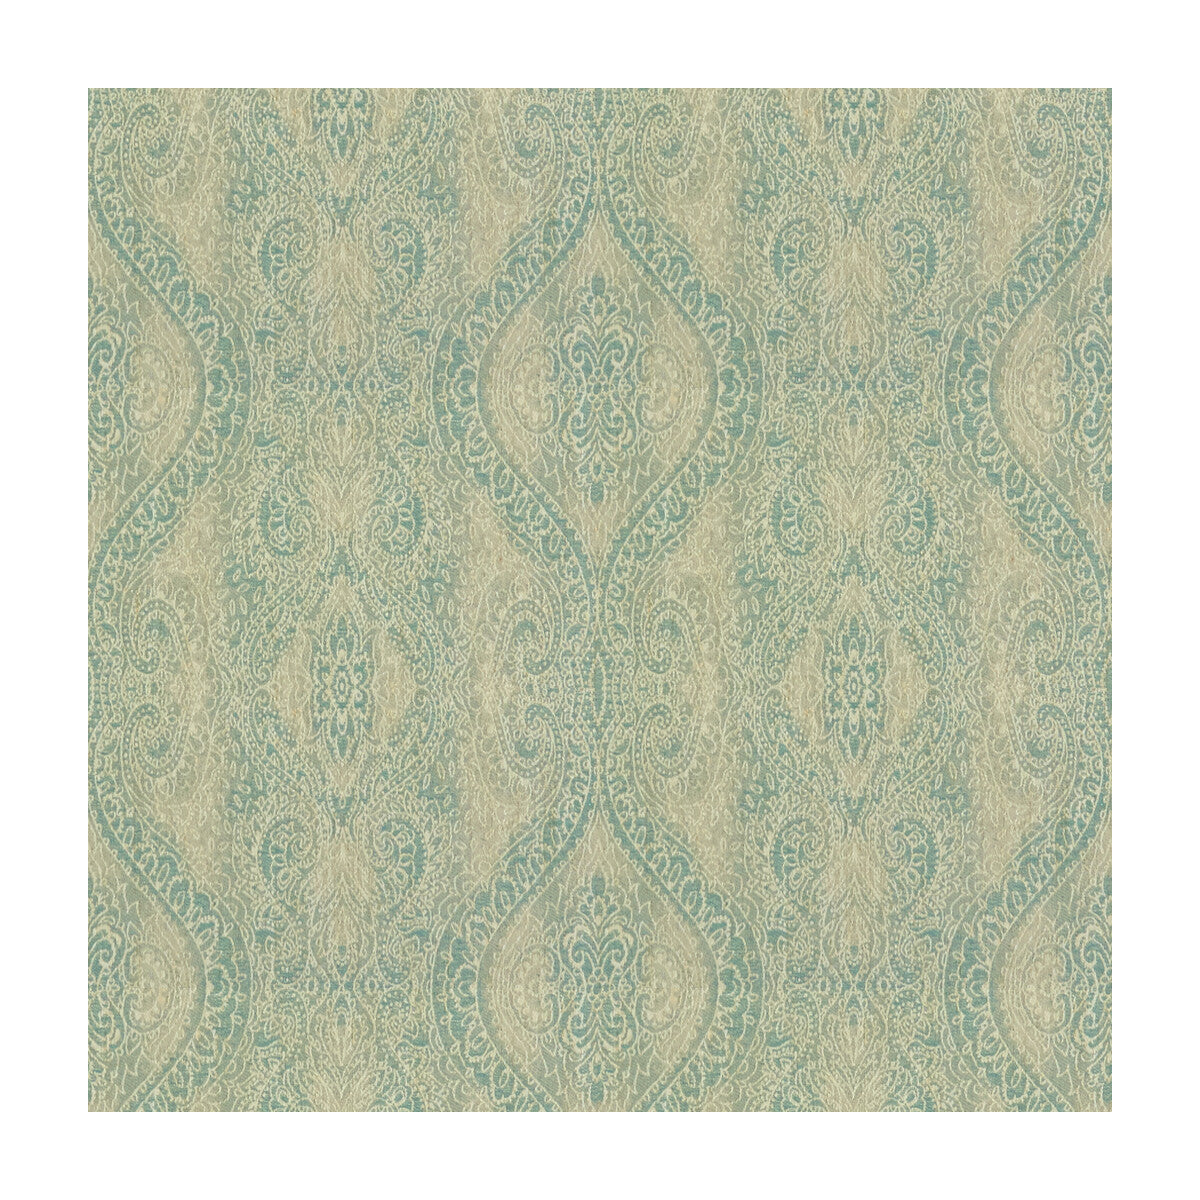 Kobuk fabric in seamist color - pattern 34162.15.0 - by Kravet Design in the Candice Olson collection